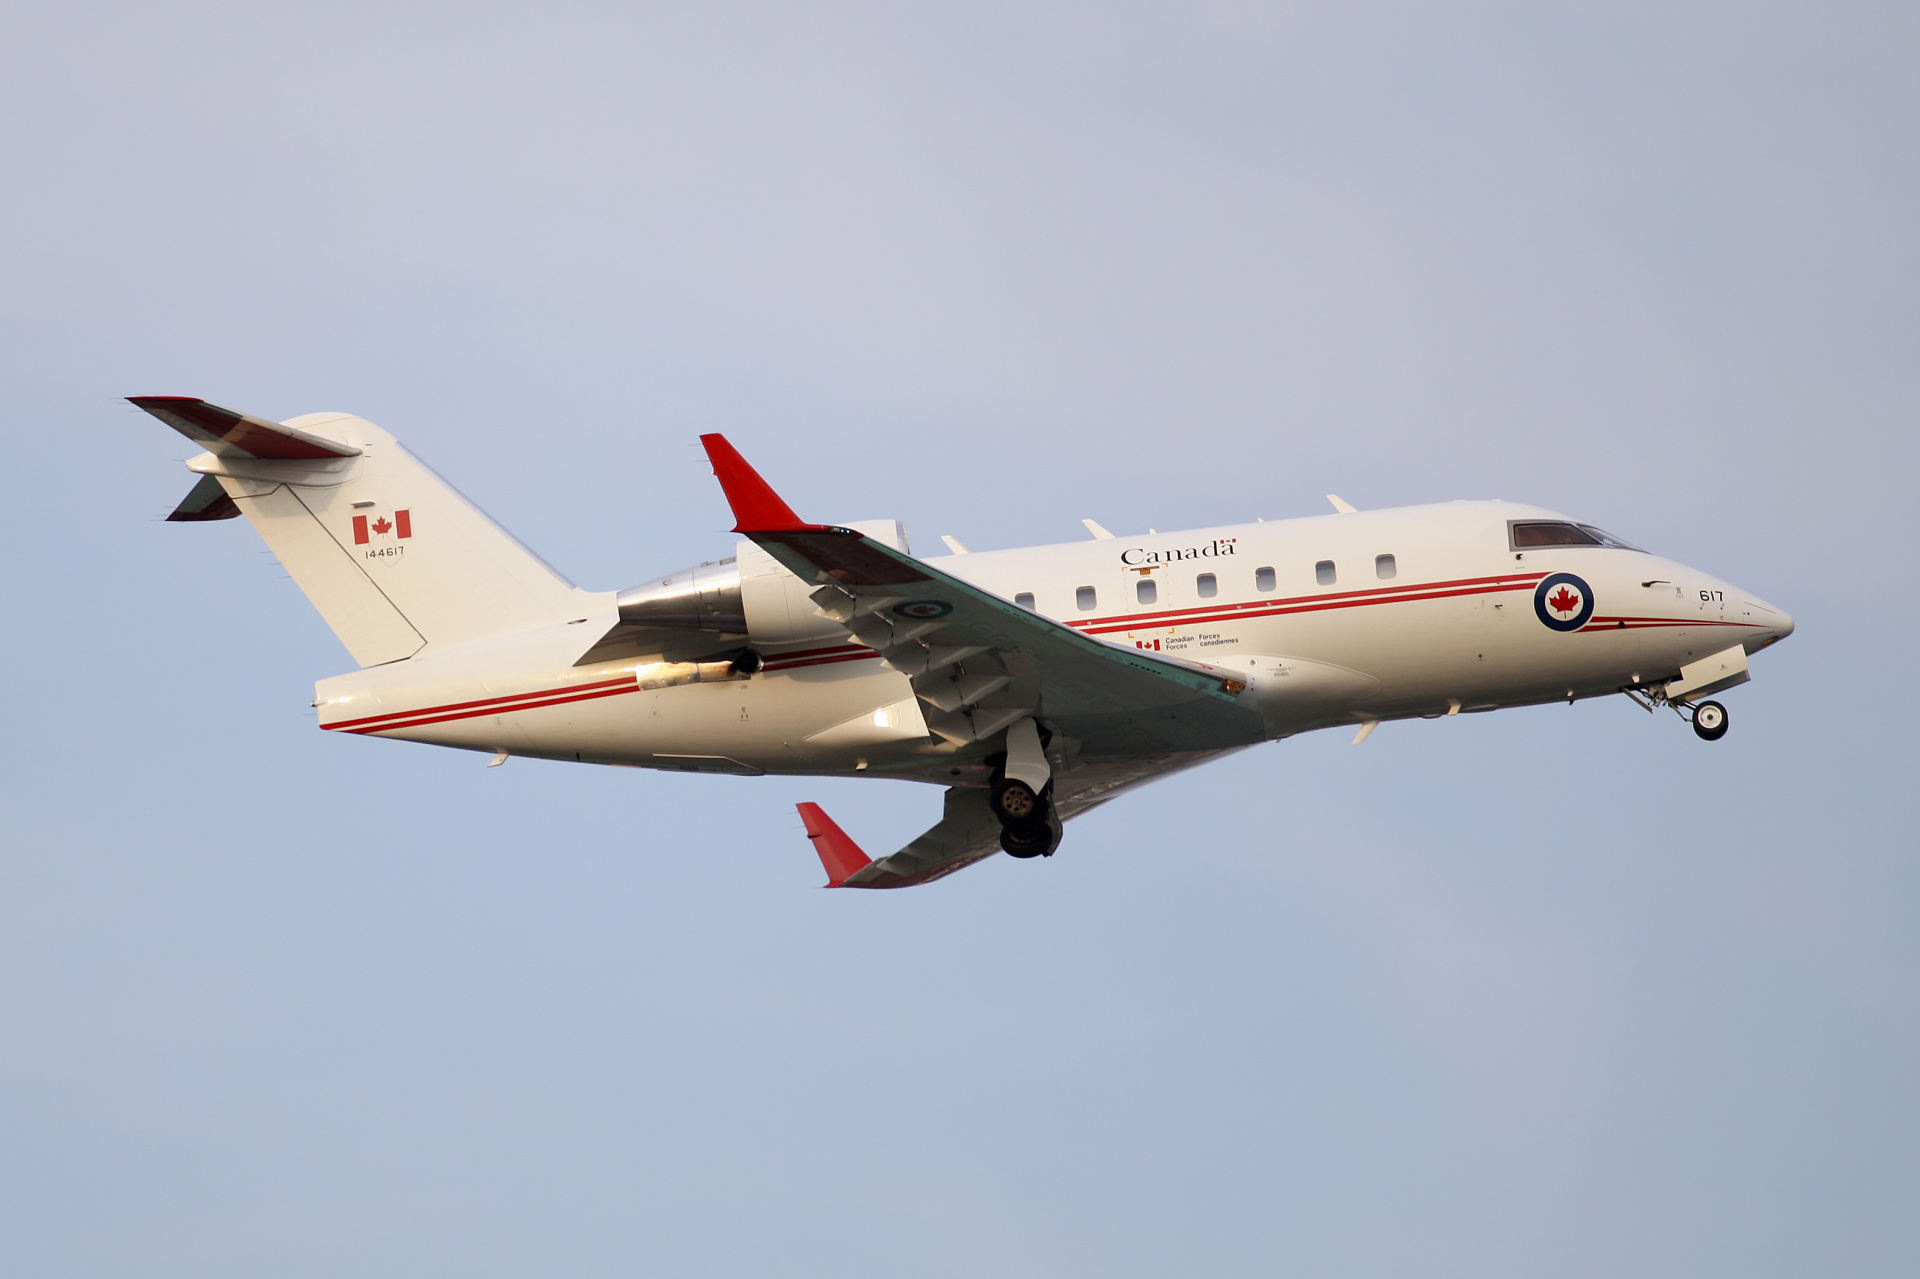 CC 144C, 144,617, Canadian Air Force (Aircraft » EPWA Spotting » Bombardier CL-600 Challenger 60x » Challenger 601)